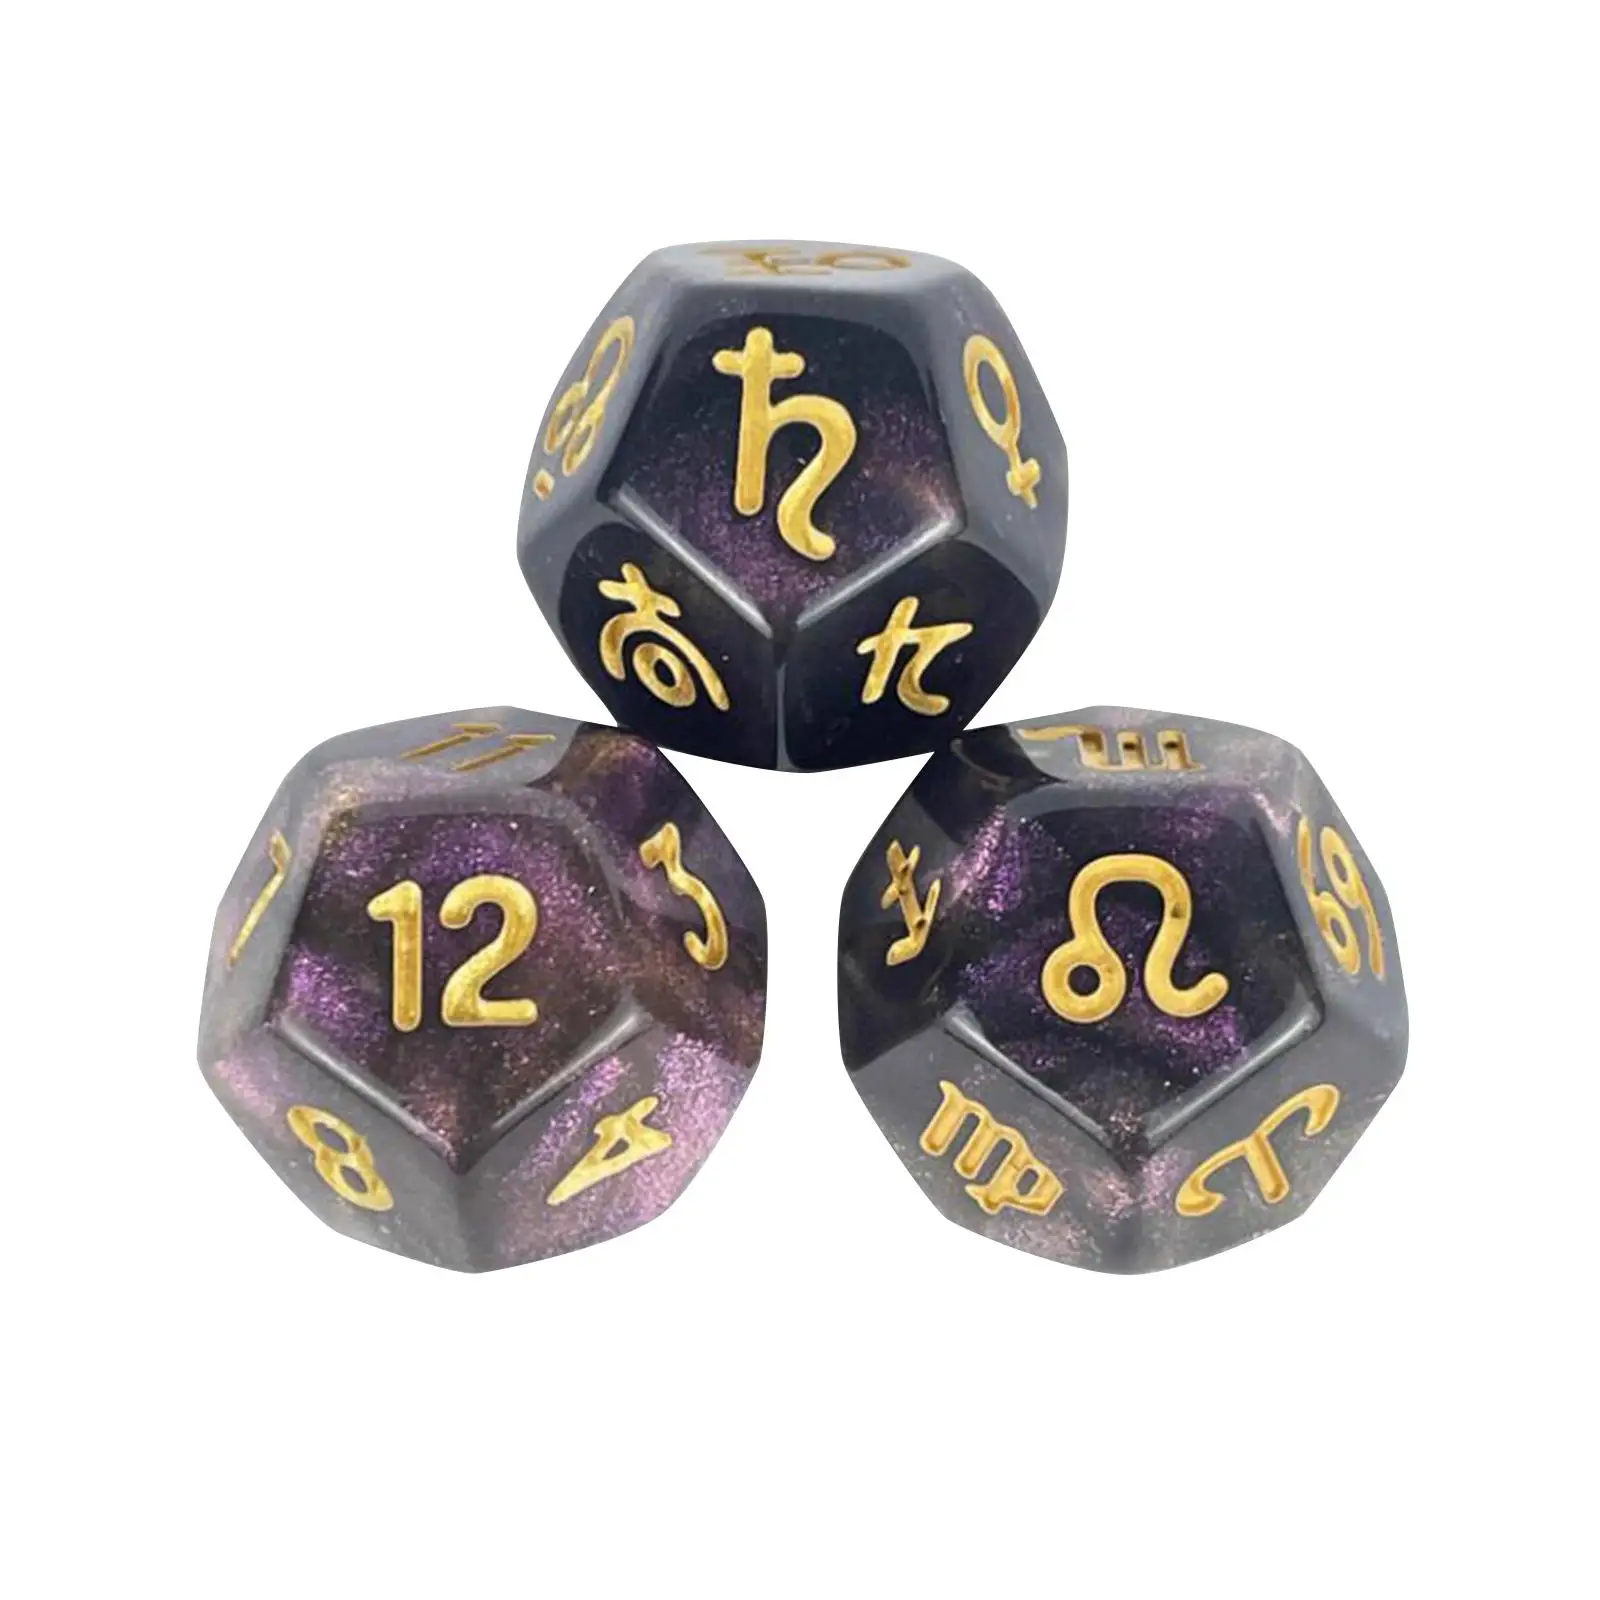 3x Tarot Cards Dice Entertainment Toys Constellation Sign Dice D12 Astrology Dice for Party Astro Divination Gaming Accessory